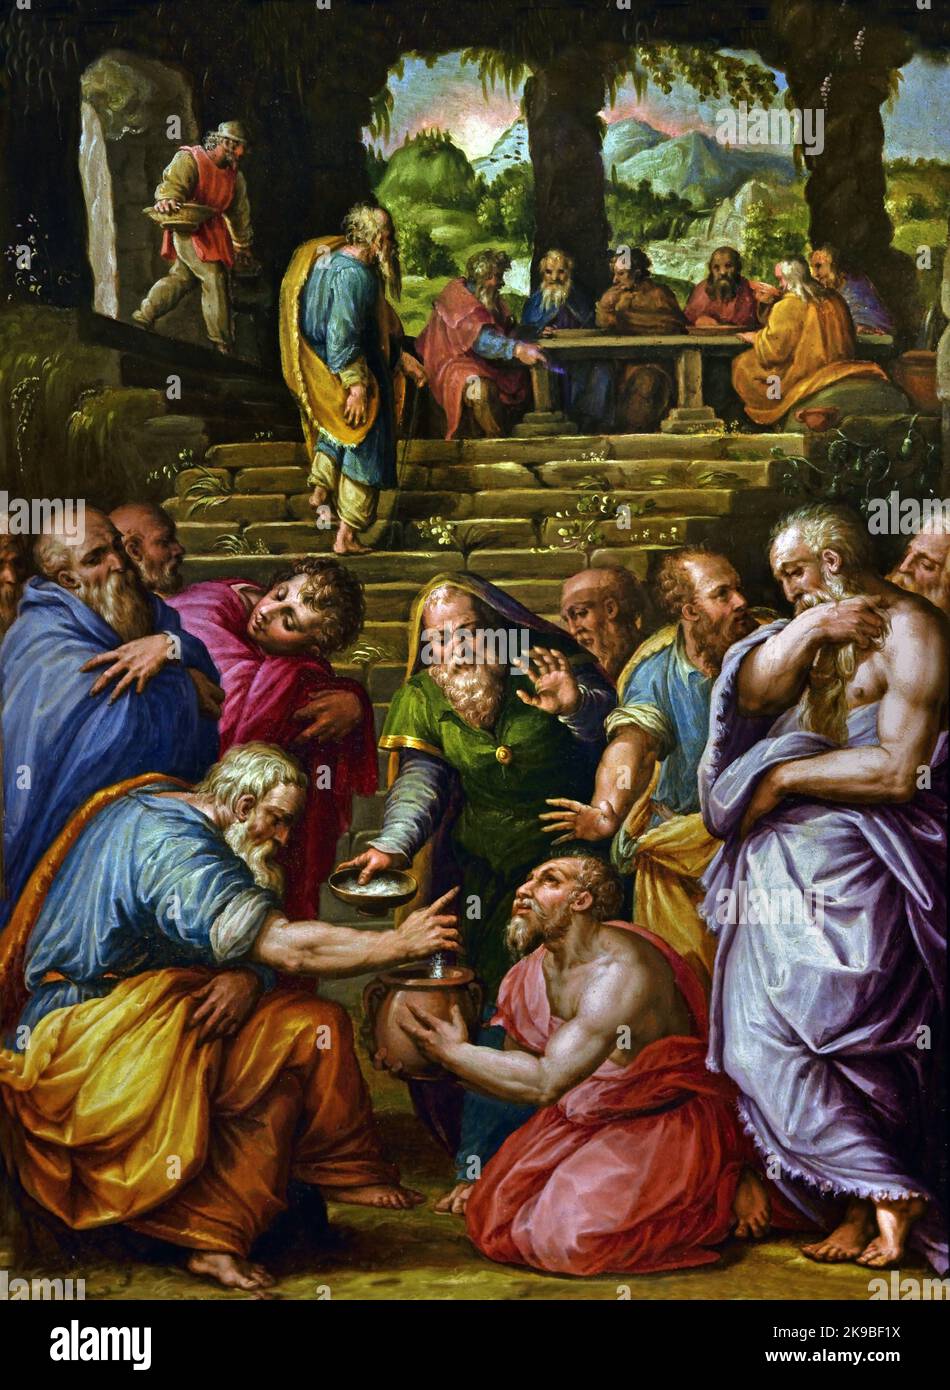 The Miracle of the Prophet Elisha 1566 by Giorgio VASARI Arezzo, 1511 – Florence, 1574, Italian, Italy, Elisha, Nourish the sons of the prophets, pressed by famine, Elisha changed a pottage, made from poisonous gourds into wholesome food, He fed a hundred men , twenty loaves of new barley, leaving some leftover, in a story which is comparable , miracles of Jesus in the New Testament, Stock Photo